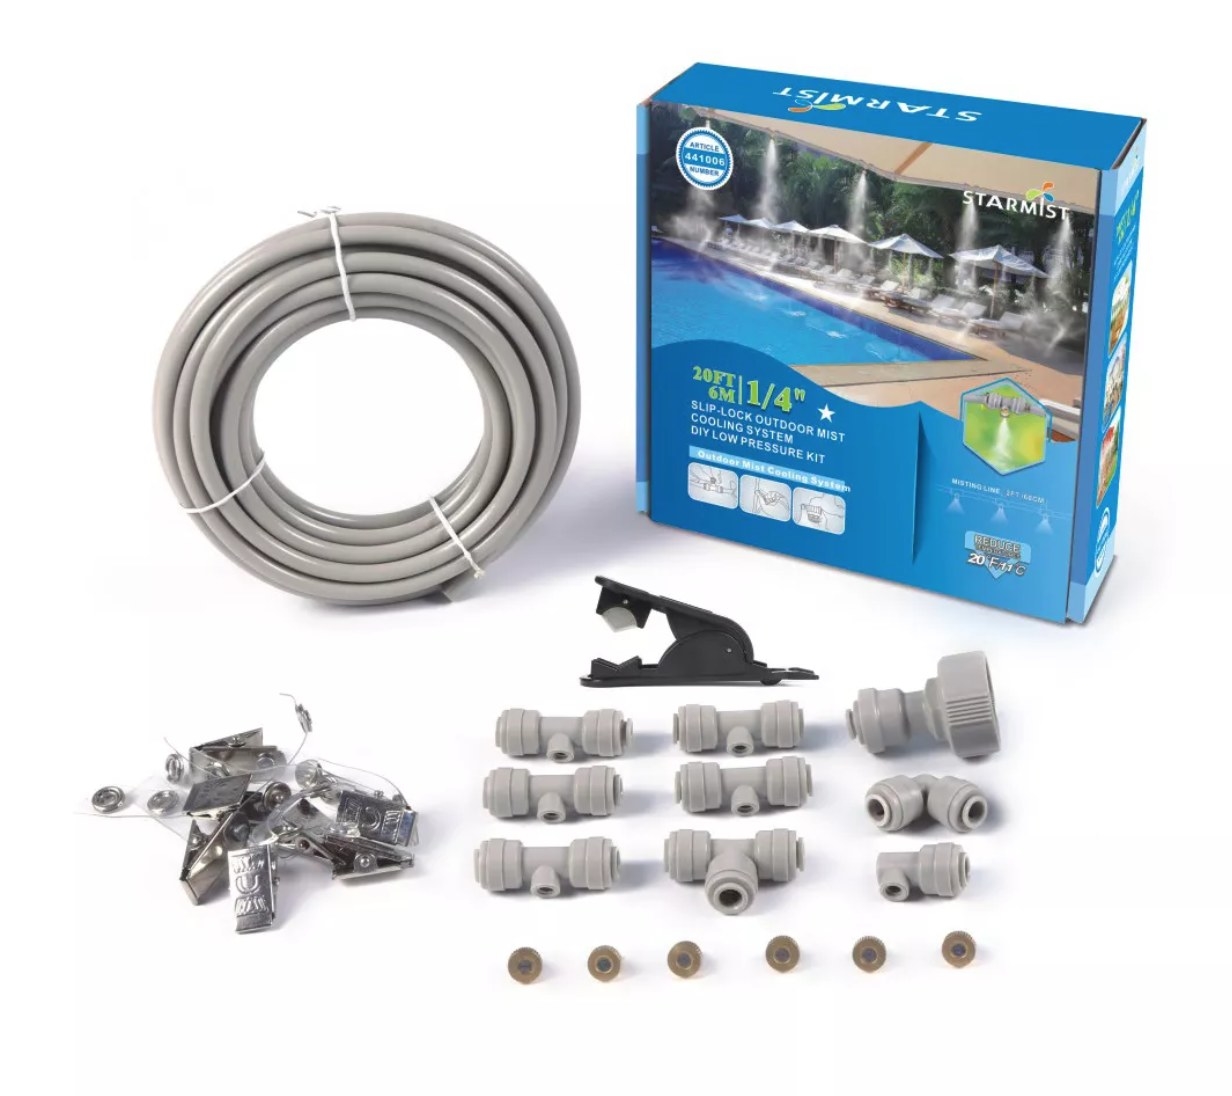 A kit with a hose and small parts